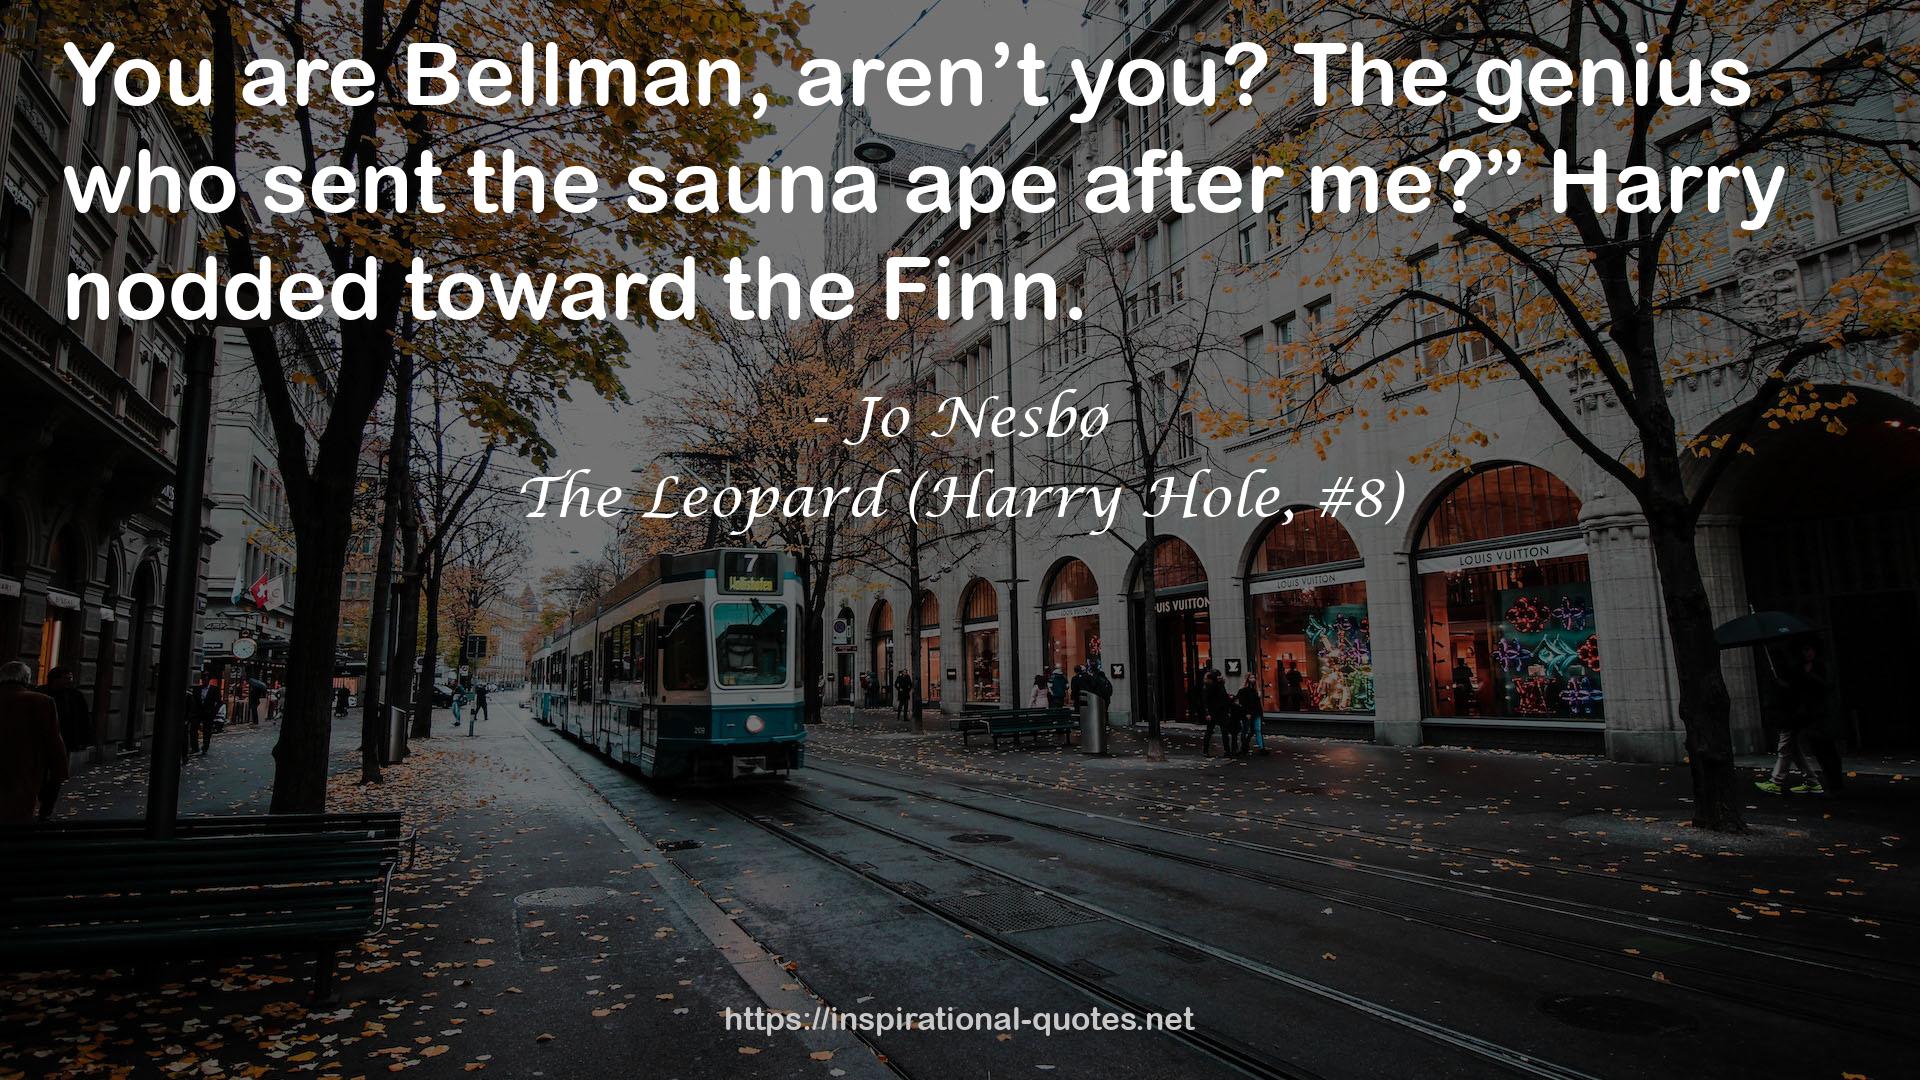 The Leopard (Harry Hole, #8) QUOTES